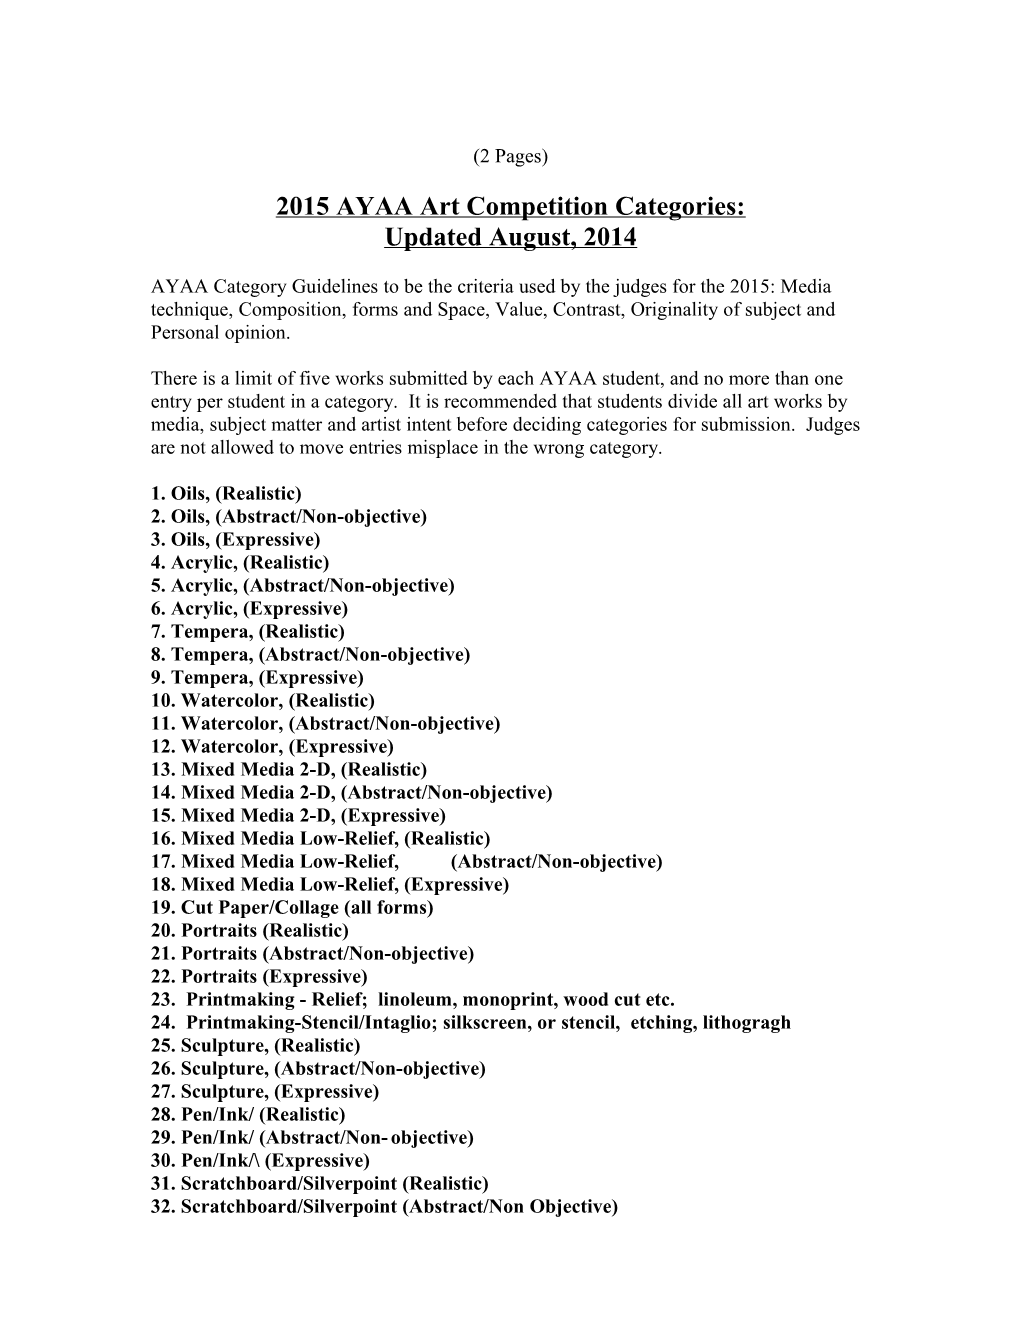 2009 AYAA Art Competition Categories